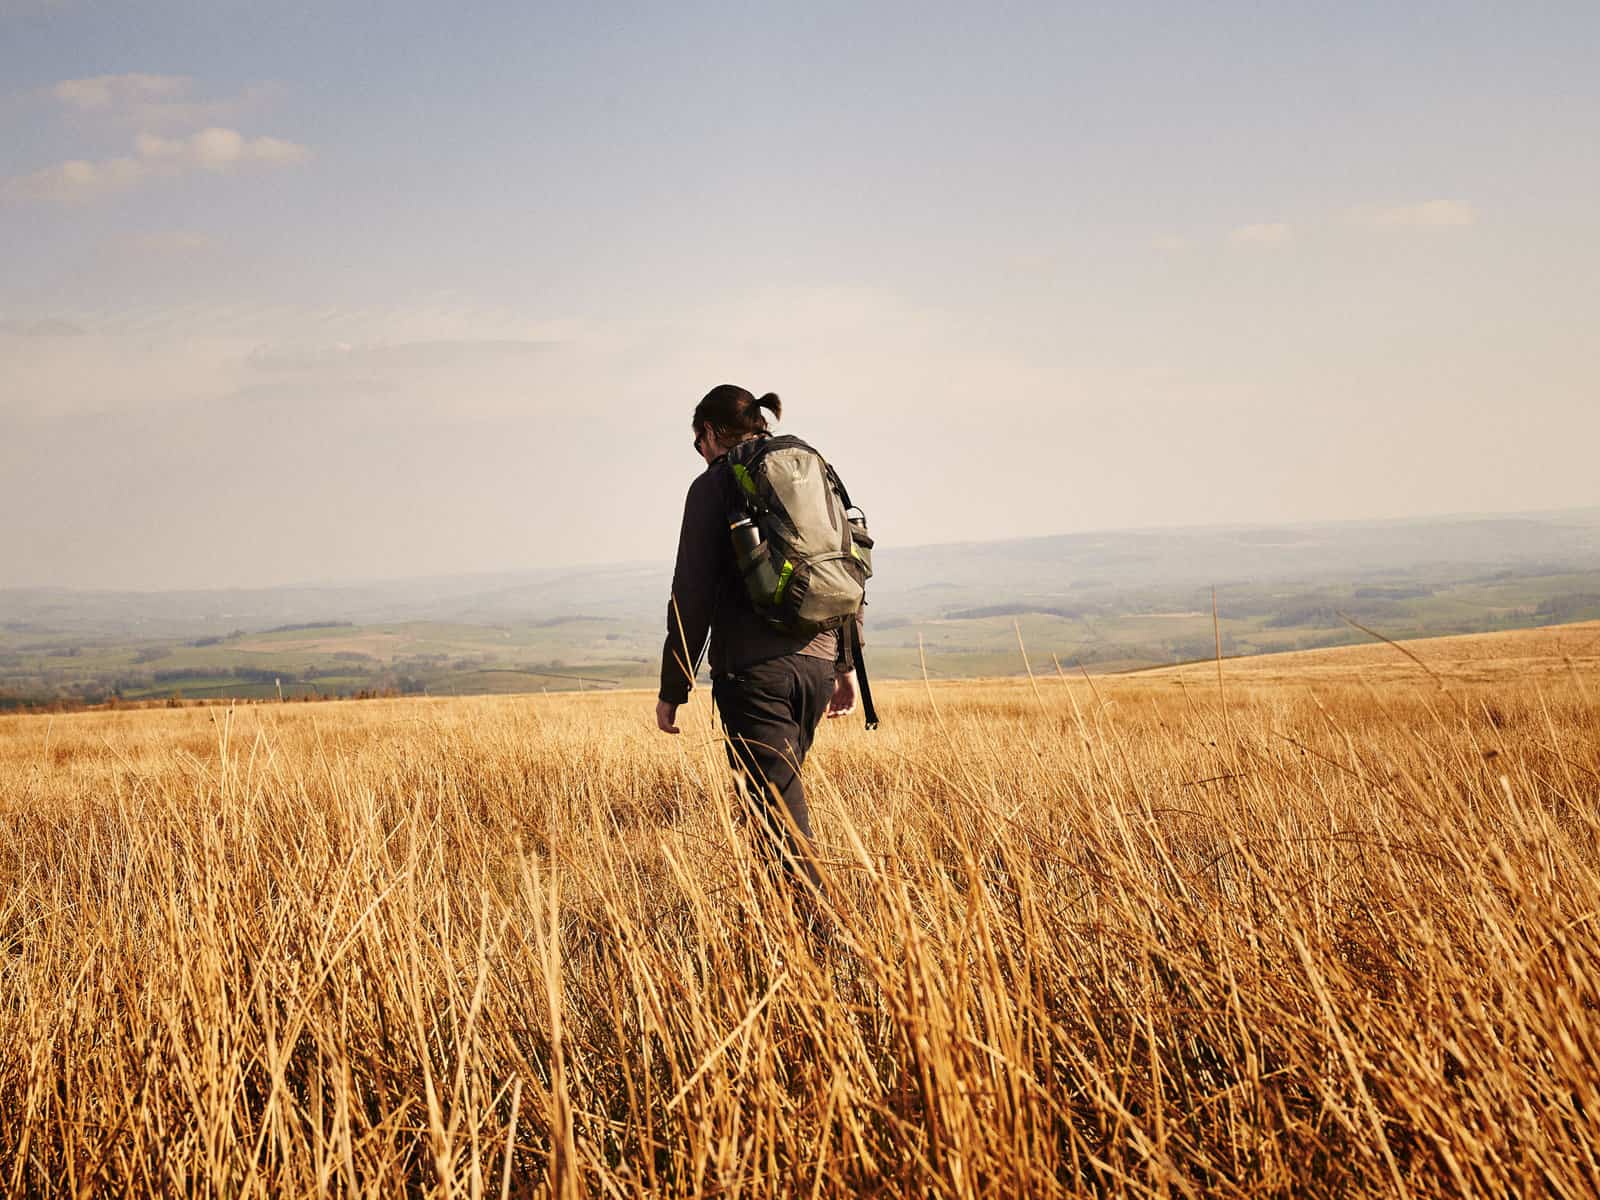 ID: A landscape image. Matt is walking away from the camera. In the foreground is long yellow grasses, which obfuscate the trail Matt is walking on in the background. In the background, we can see hills that are hazy in the bright light. The sky is …